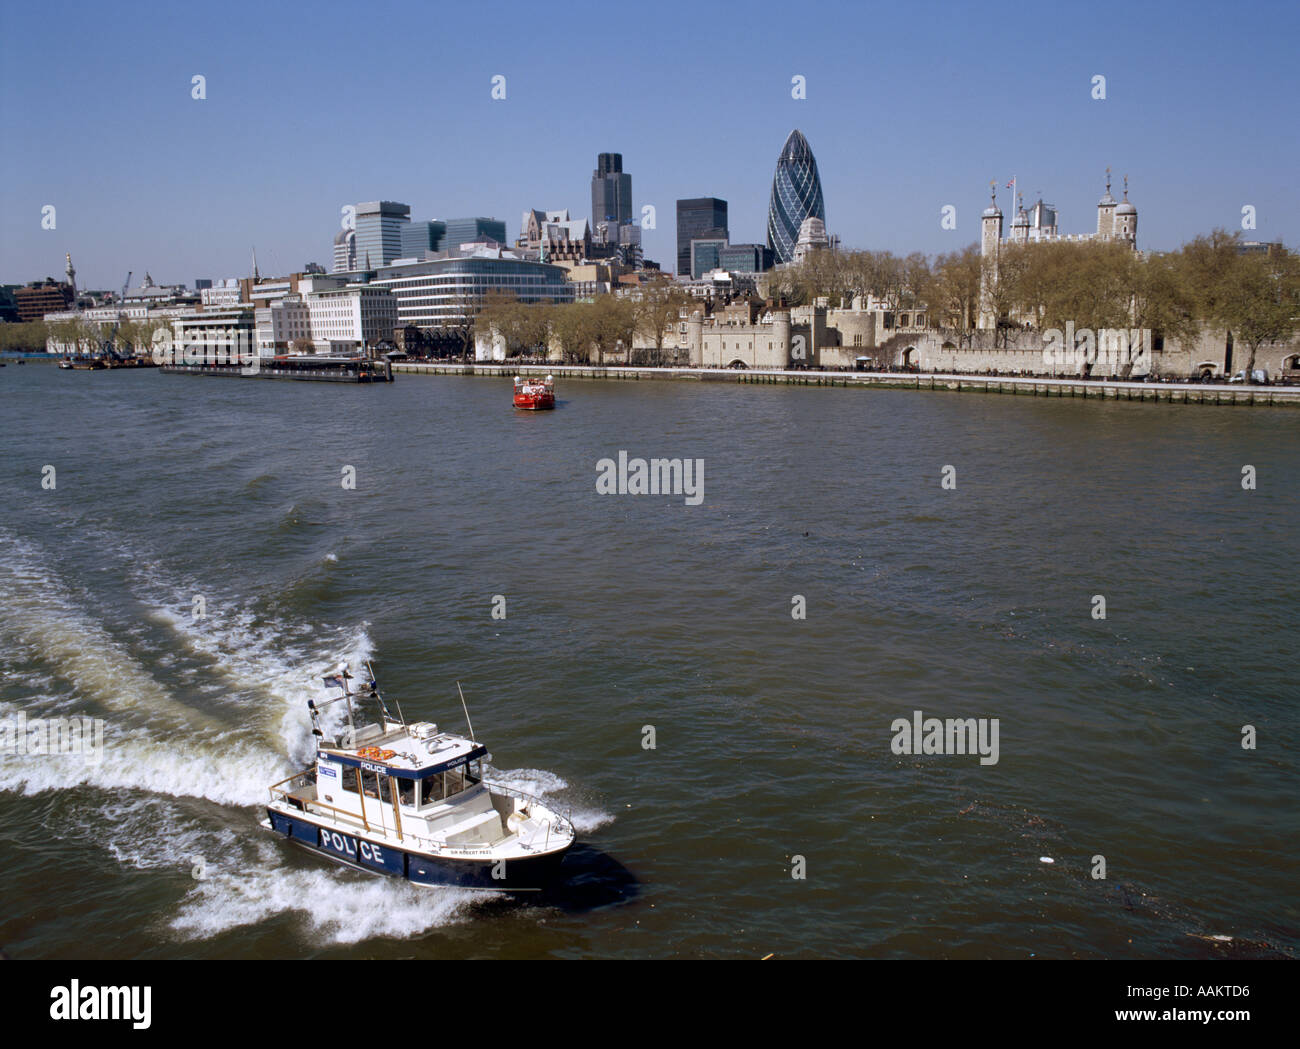 River Police launch on River Thames in London Stock Photo